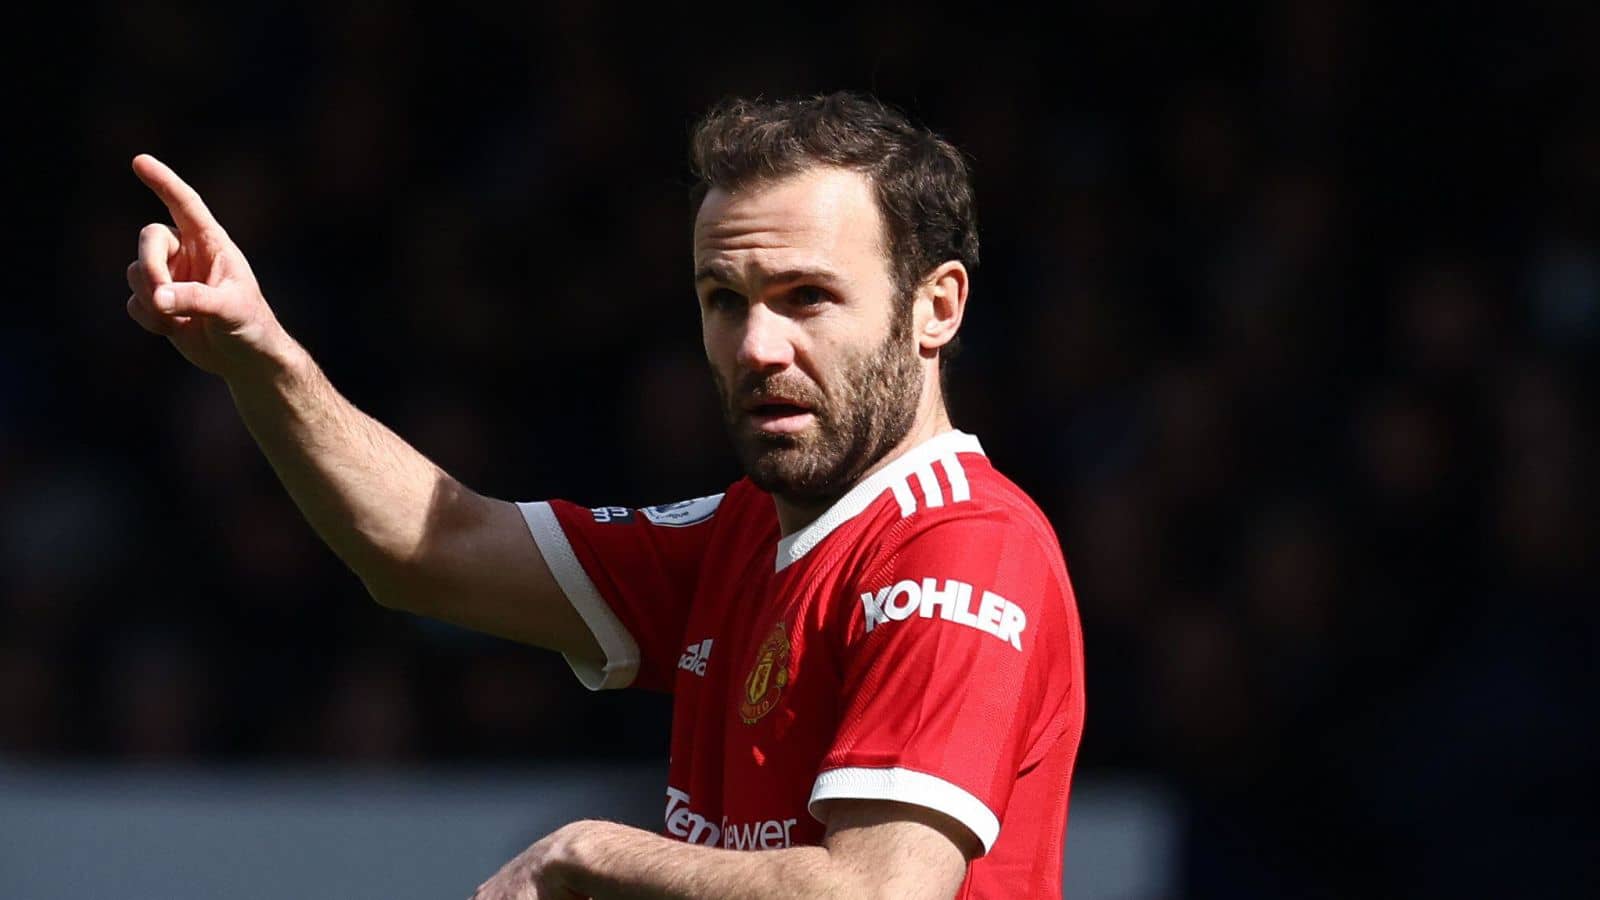 Juan Mata To Leave Manchester United Upon Contract Expiry